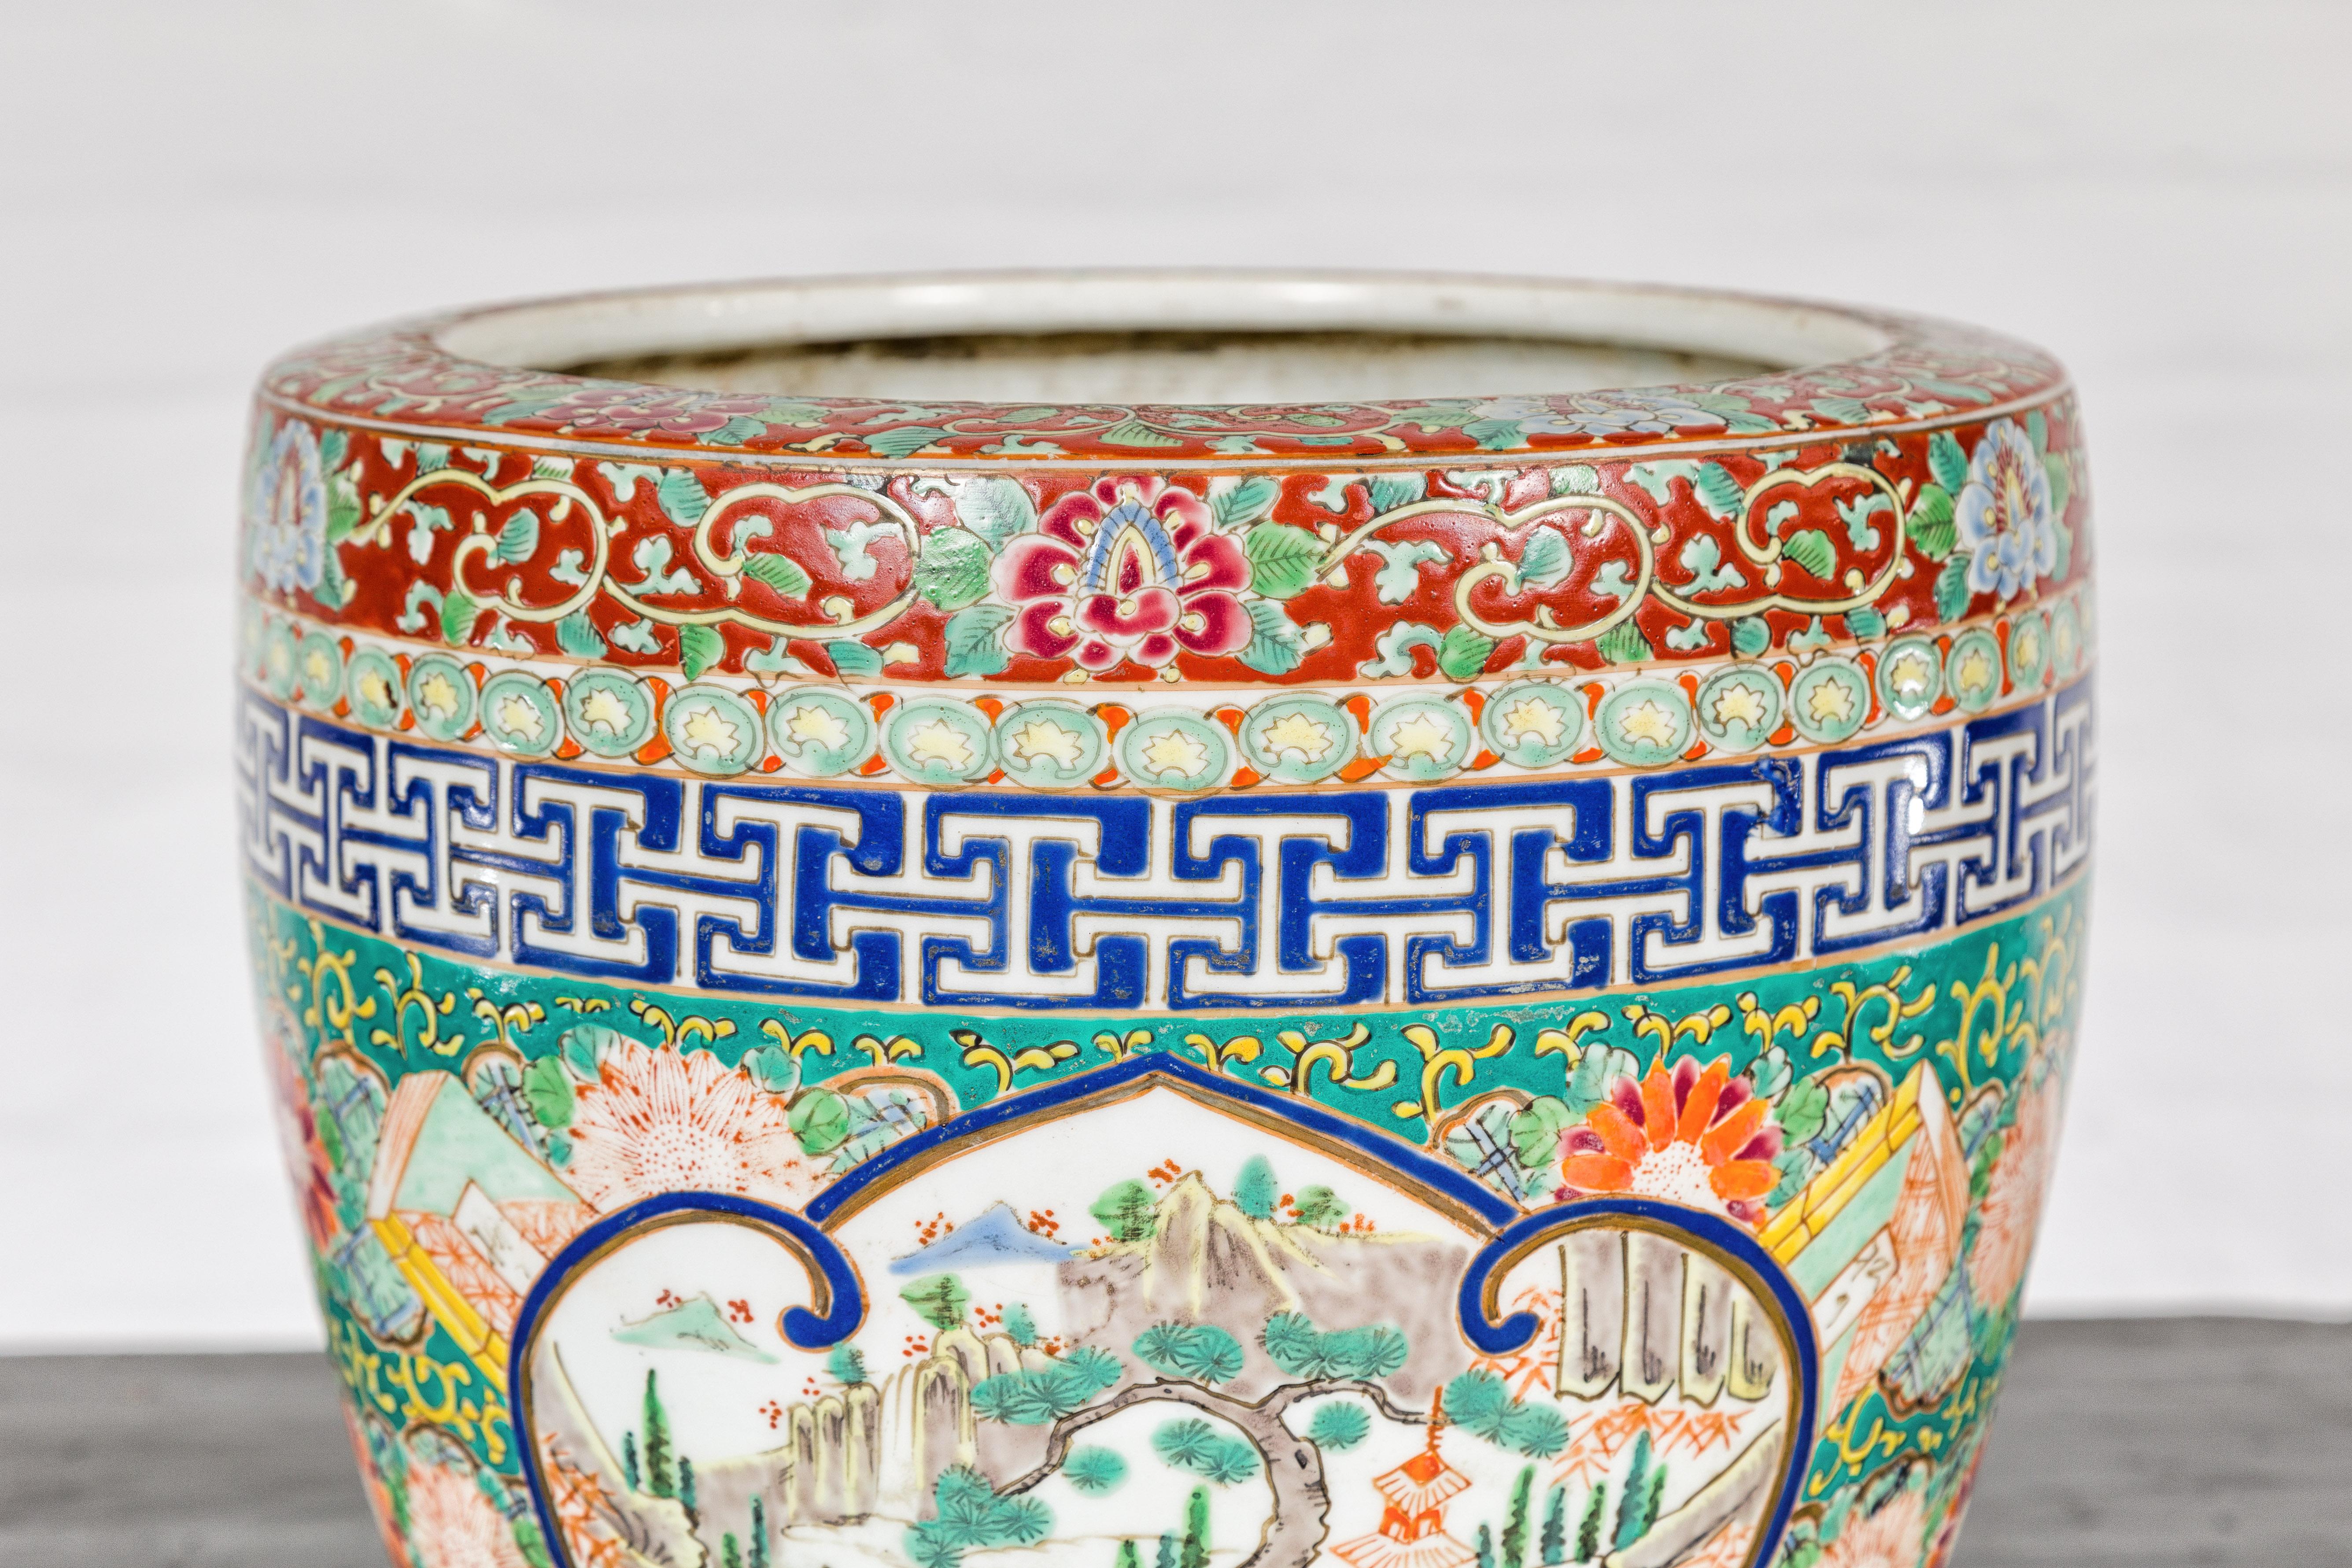 20th Century Japanese Hand-Painted Imari Planter with Landscape, Tree, Flowers and Books For Sale